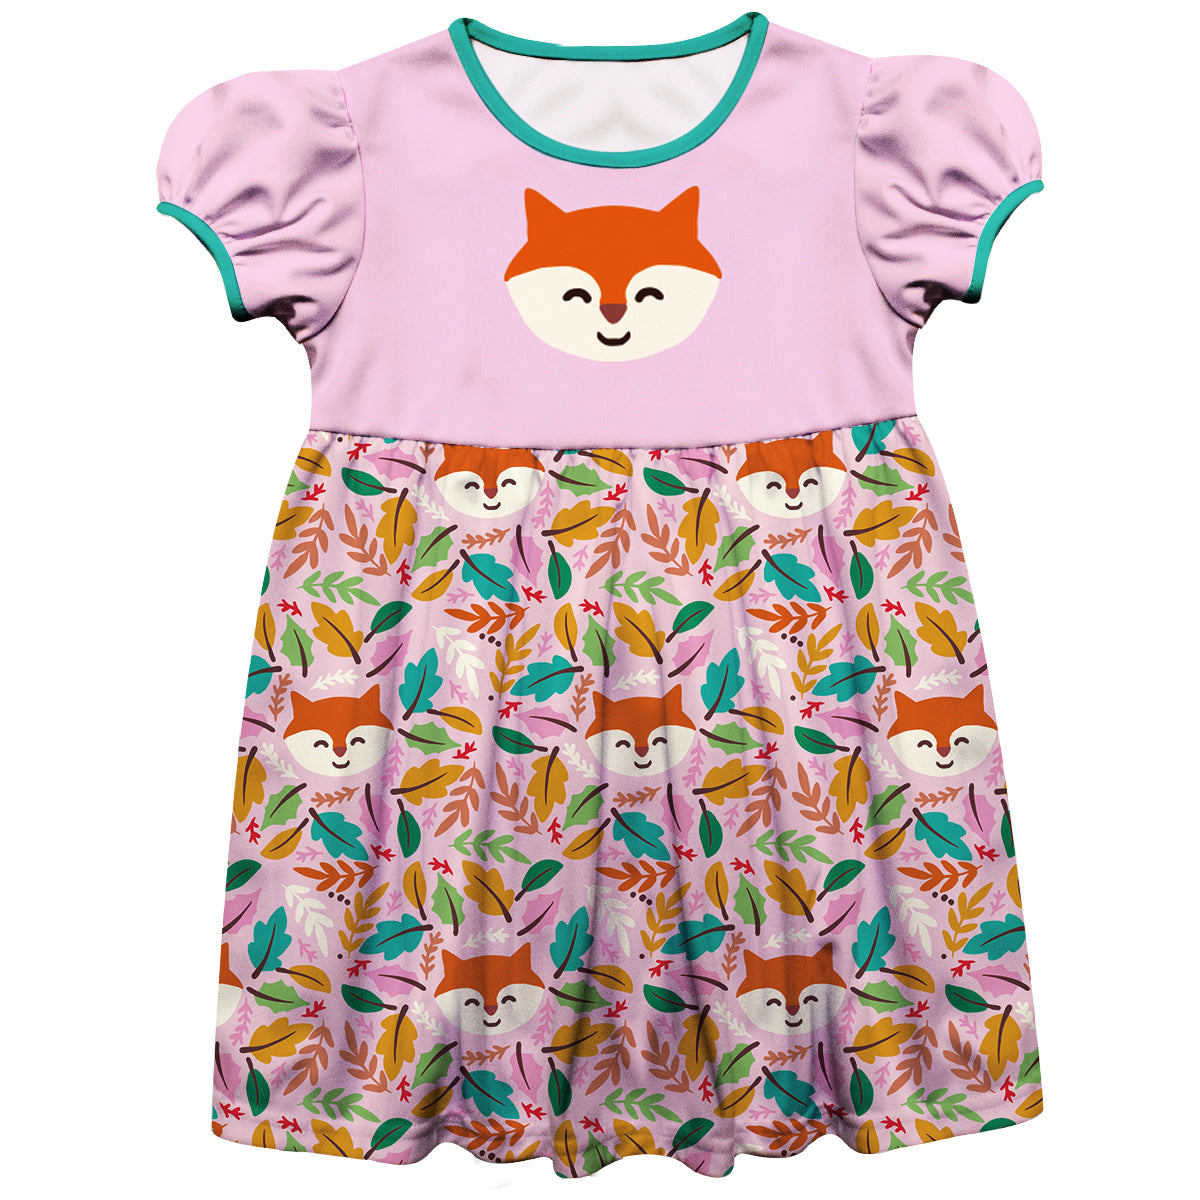 Girls pink and aqua foxy dress with name - Wimziy&Co.